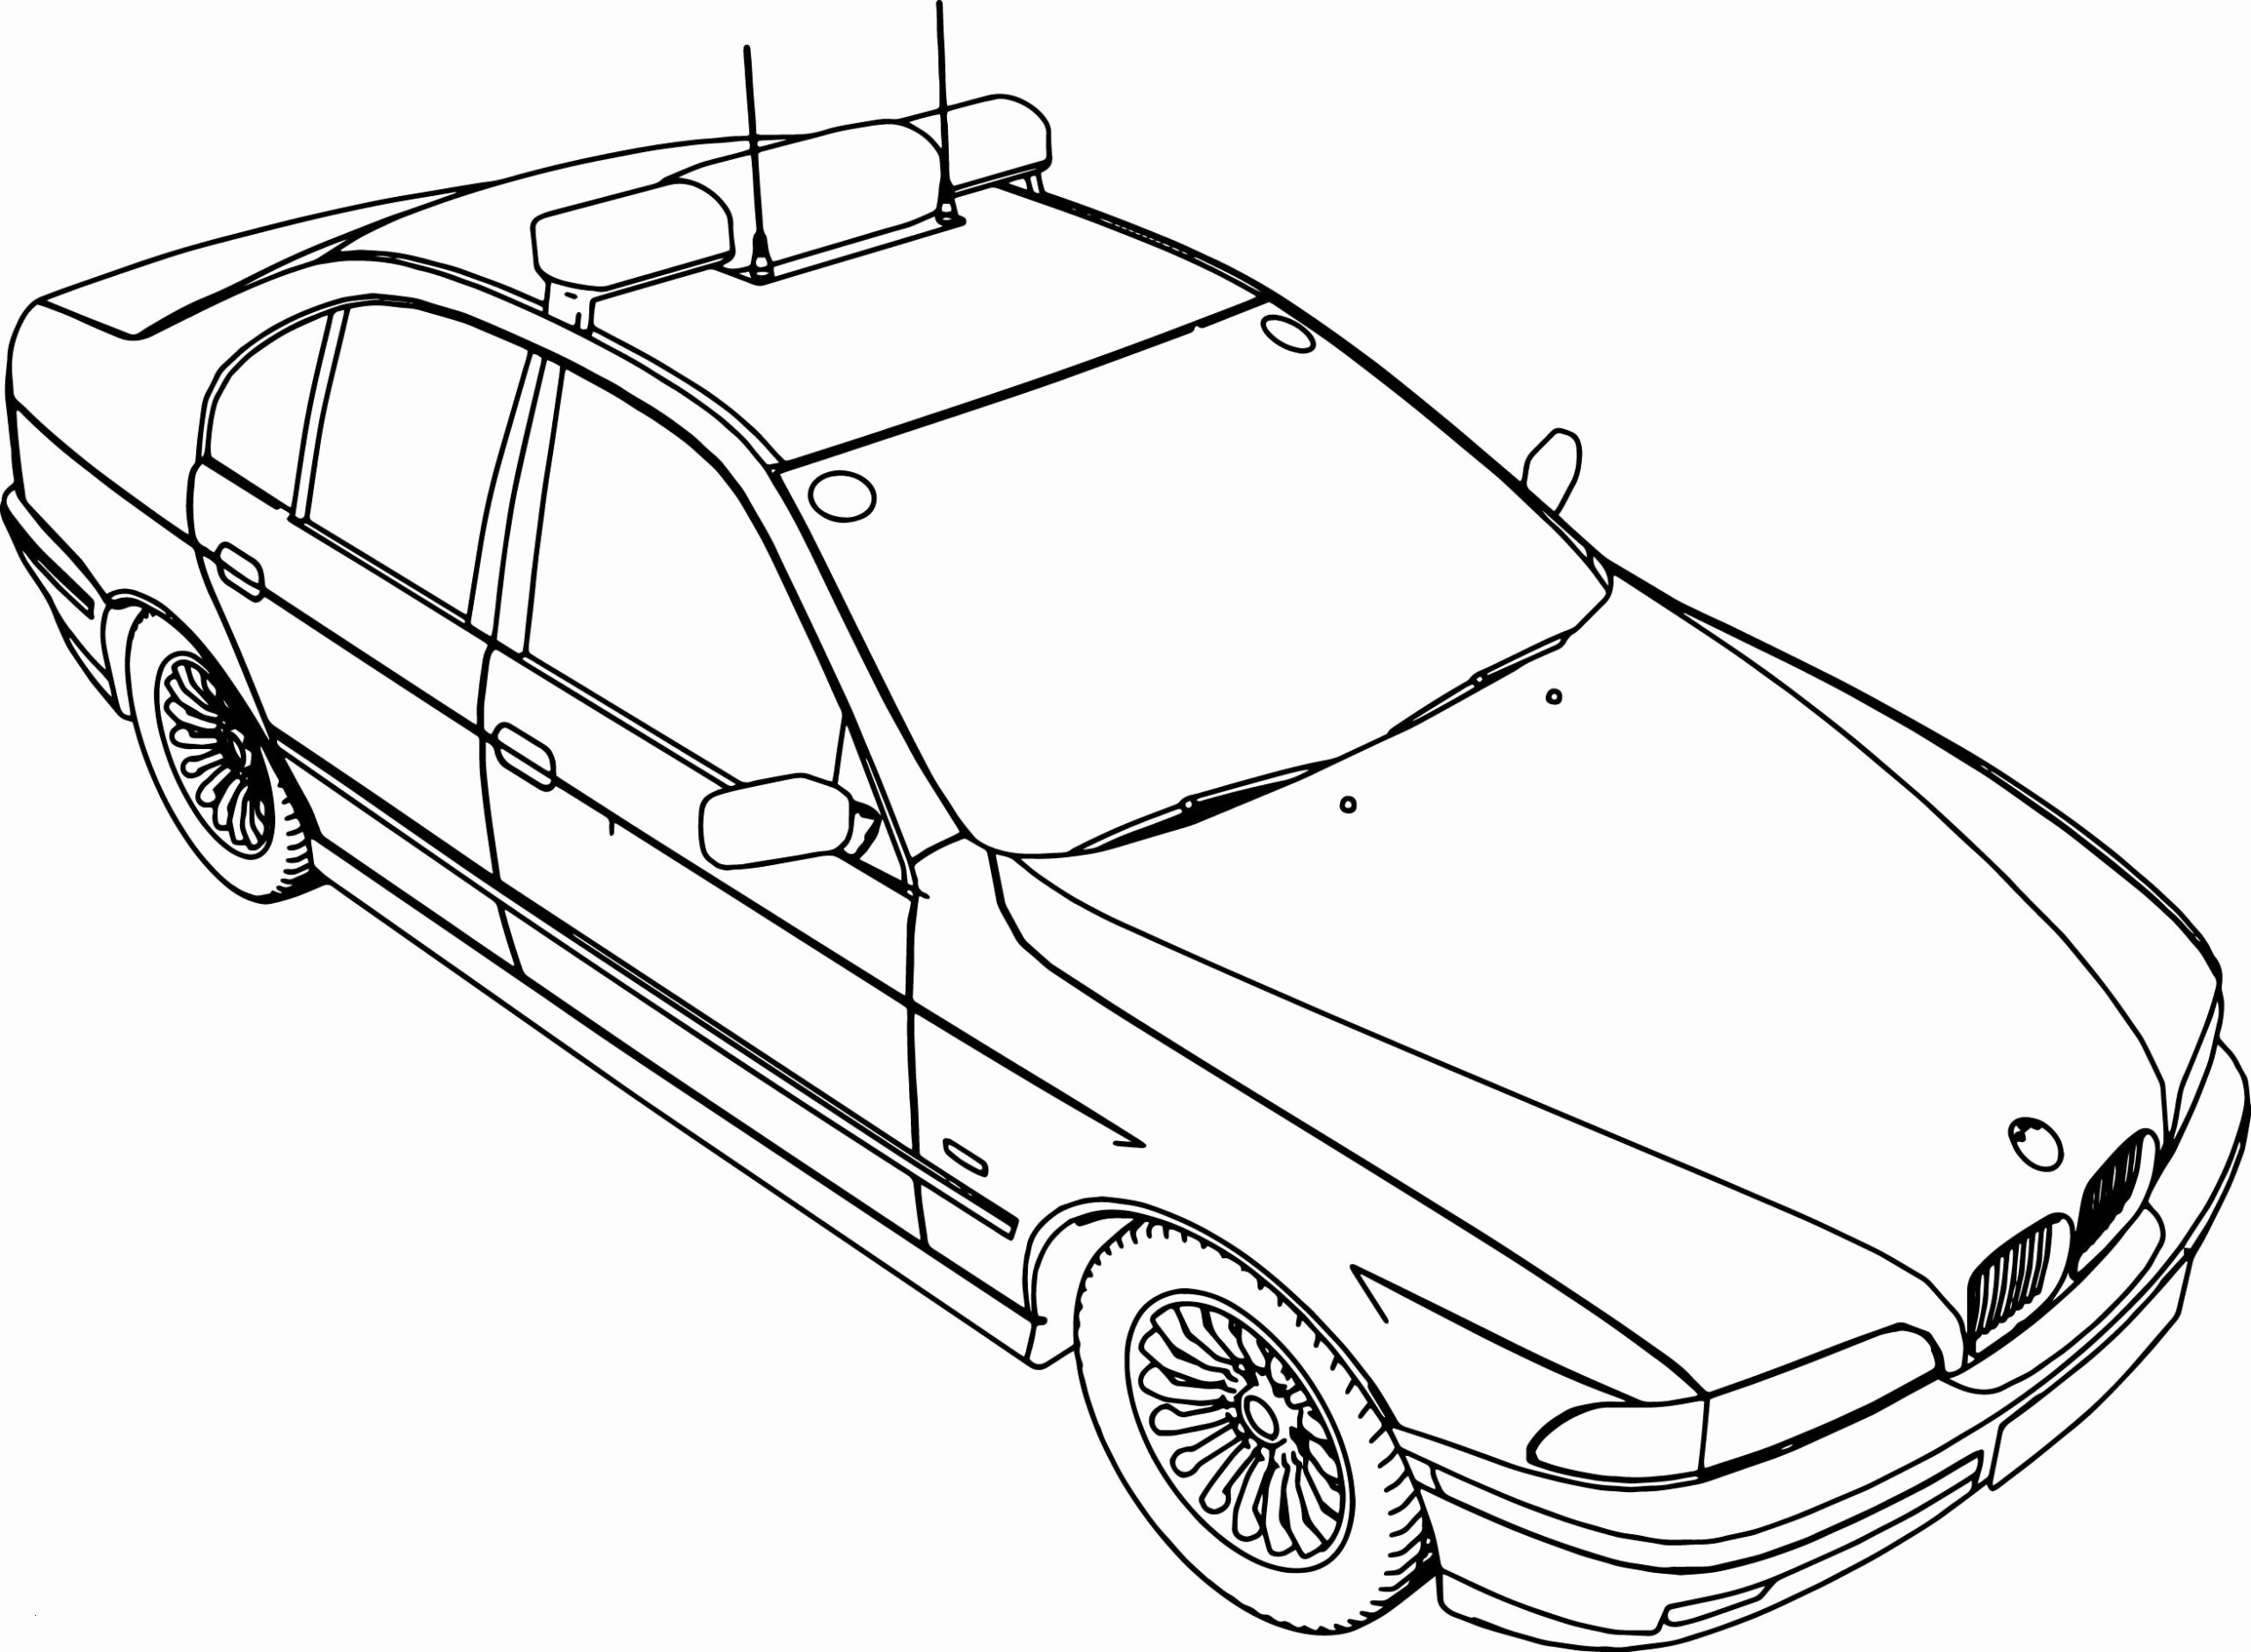 police car coloring pages to print real cars coloring pages marvellous police car coloring pages